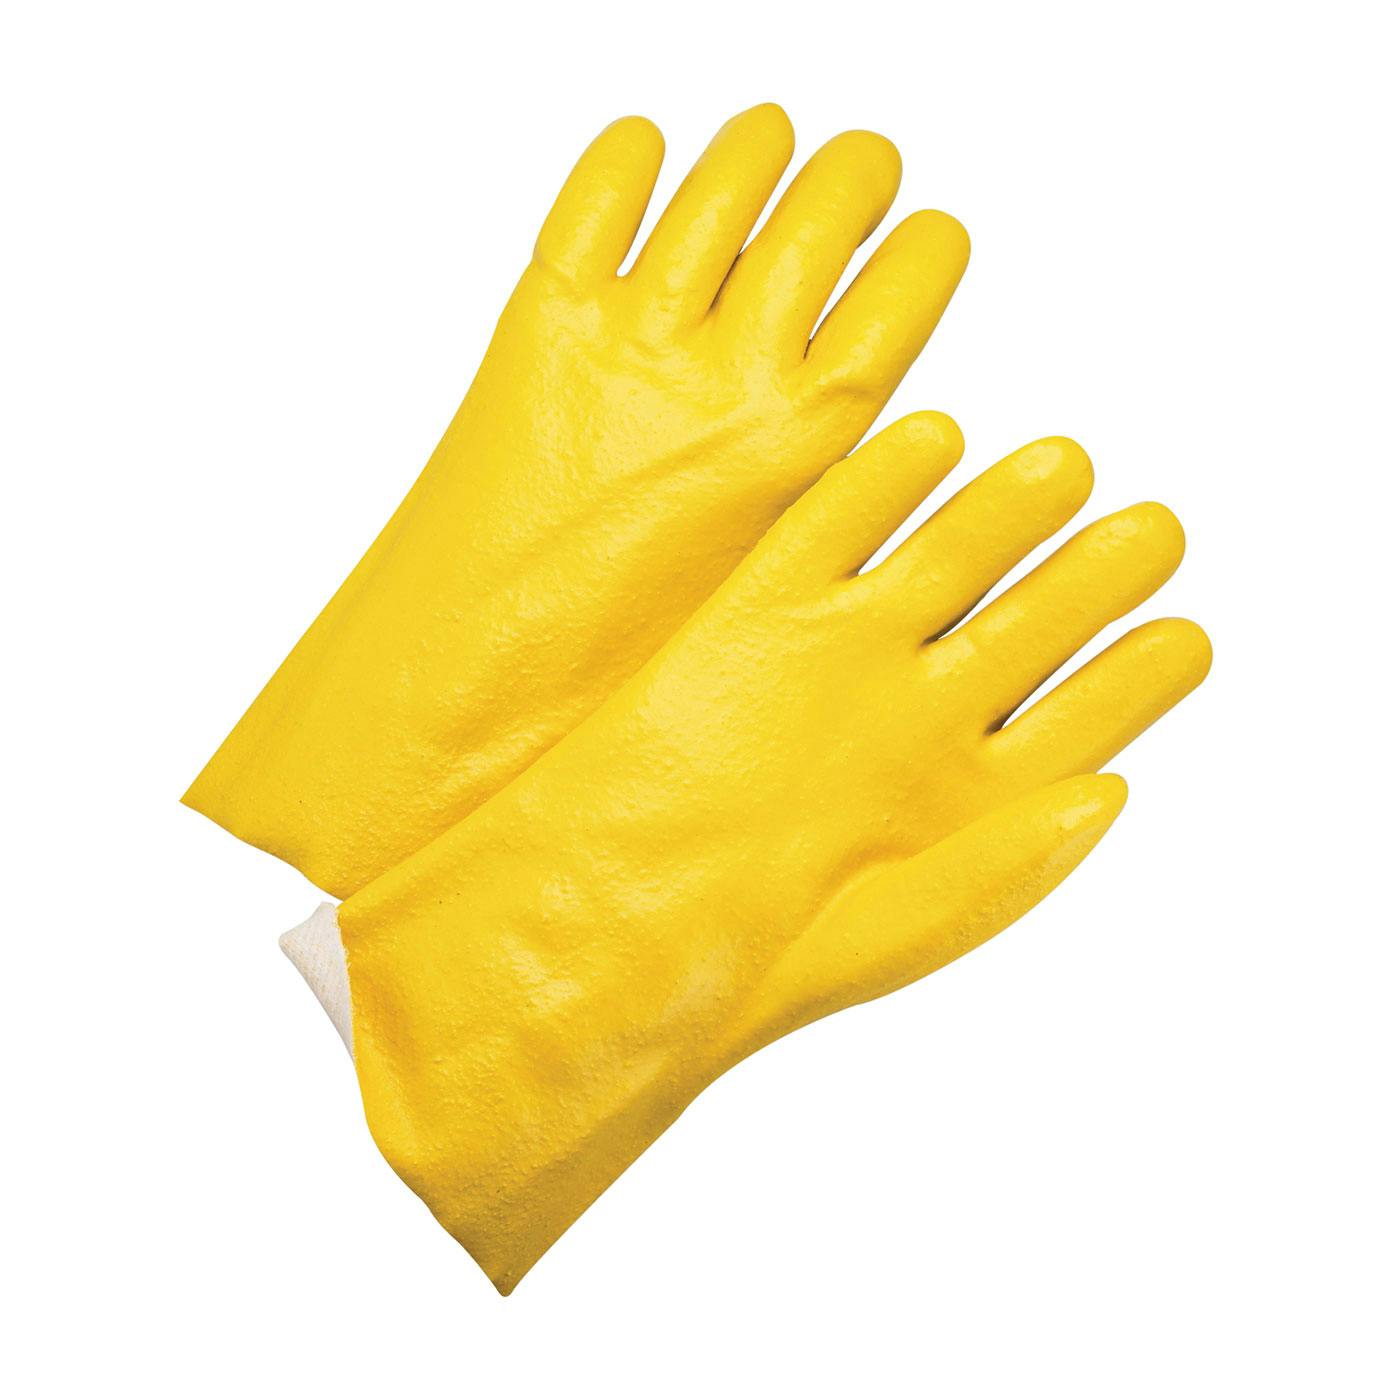 PVC Dipped Glove with Jersey Liner and Semi-Rough Finish - 12" Length, Yellow (J1027RY) - L